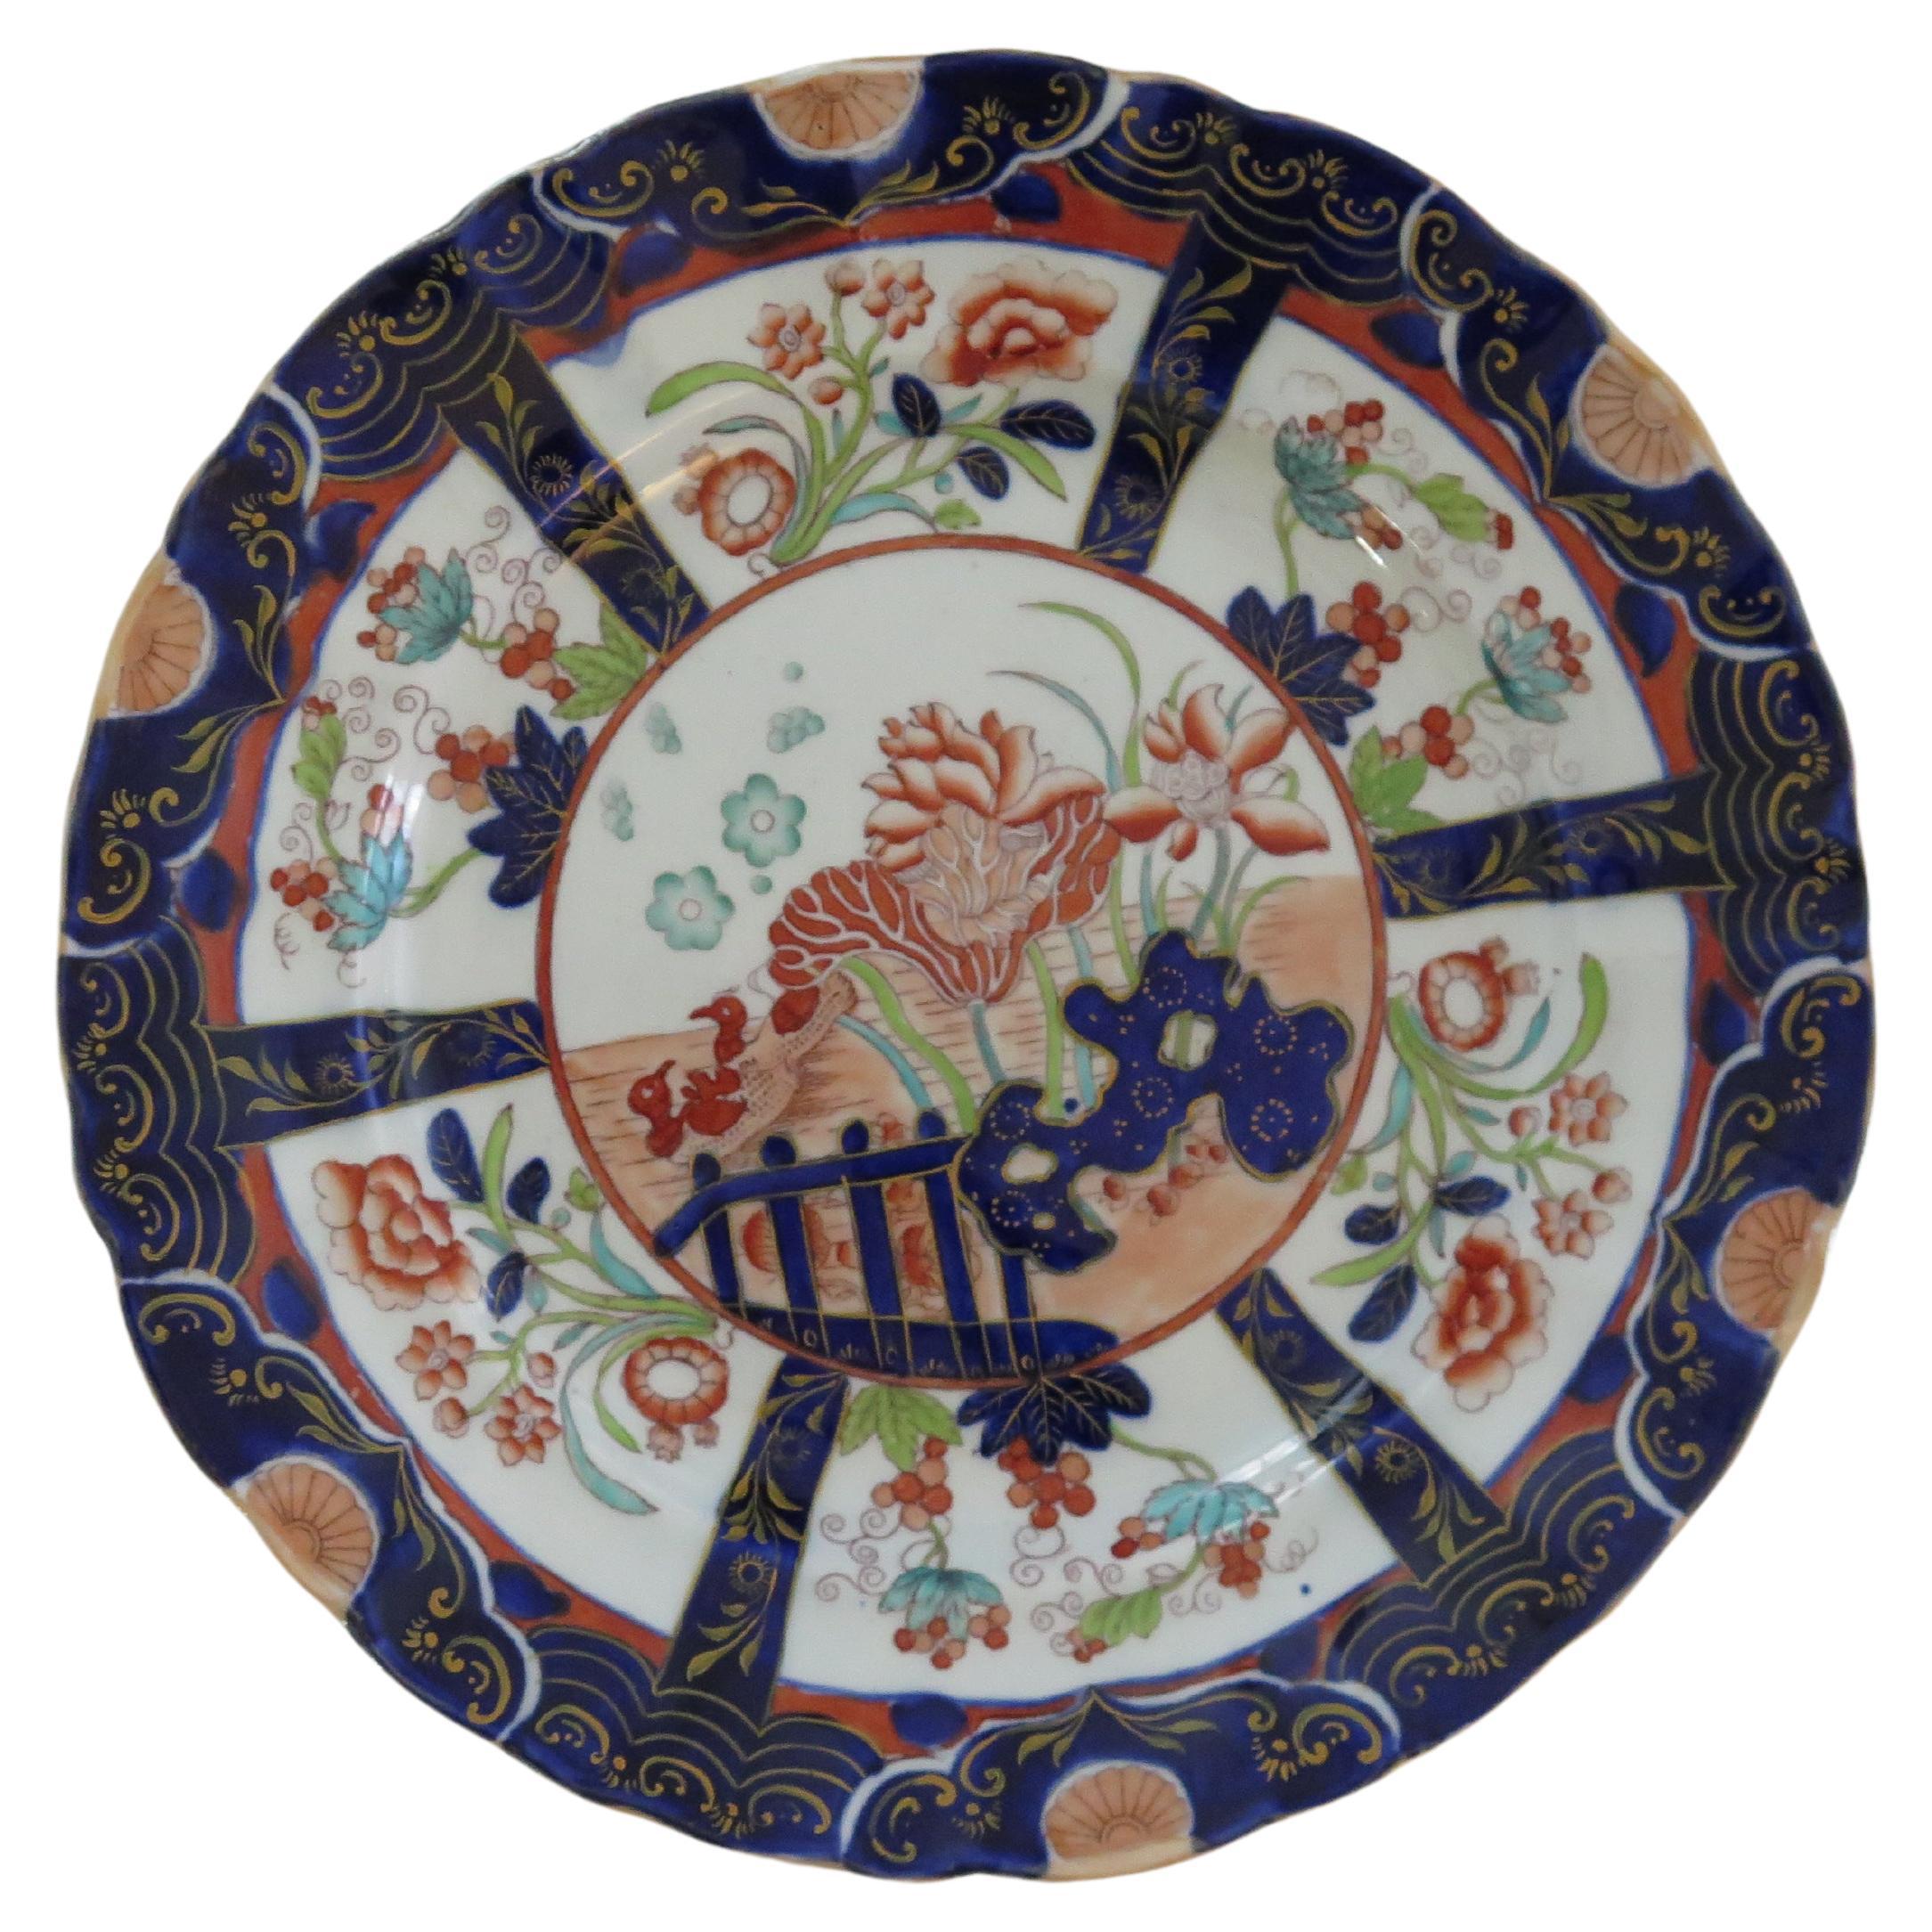 This is a beautifully hand painted Large Dinner Plate in the rare Muscove Duck and Fence pattern by Mason's Ironstone, Lane Delph, England, dating to circa 1840.

This large Dinner Plate measures about 10.3 inches diameter and is well potted with a